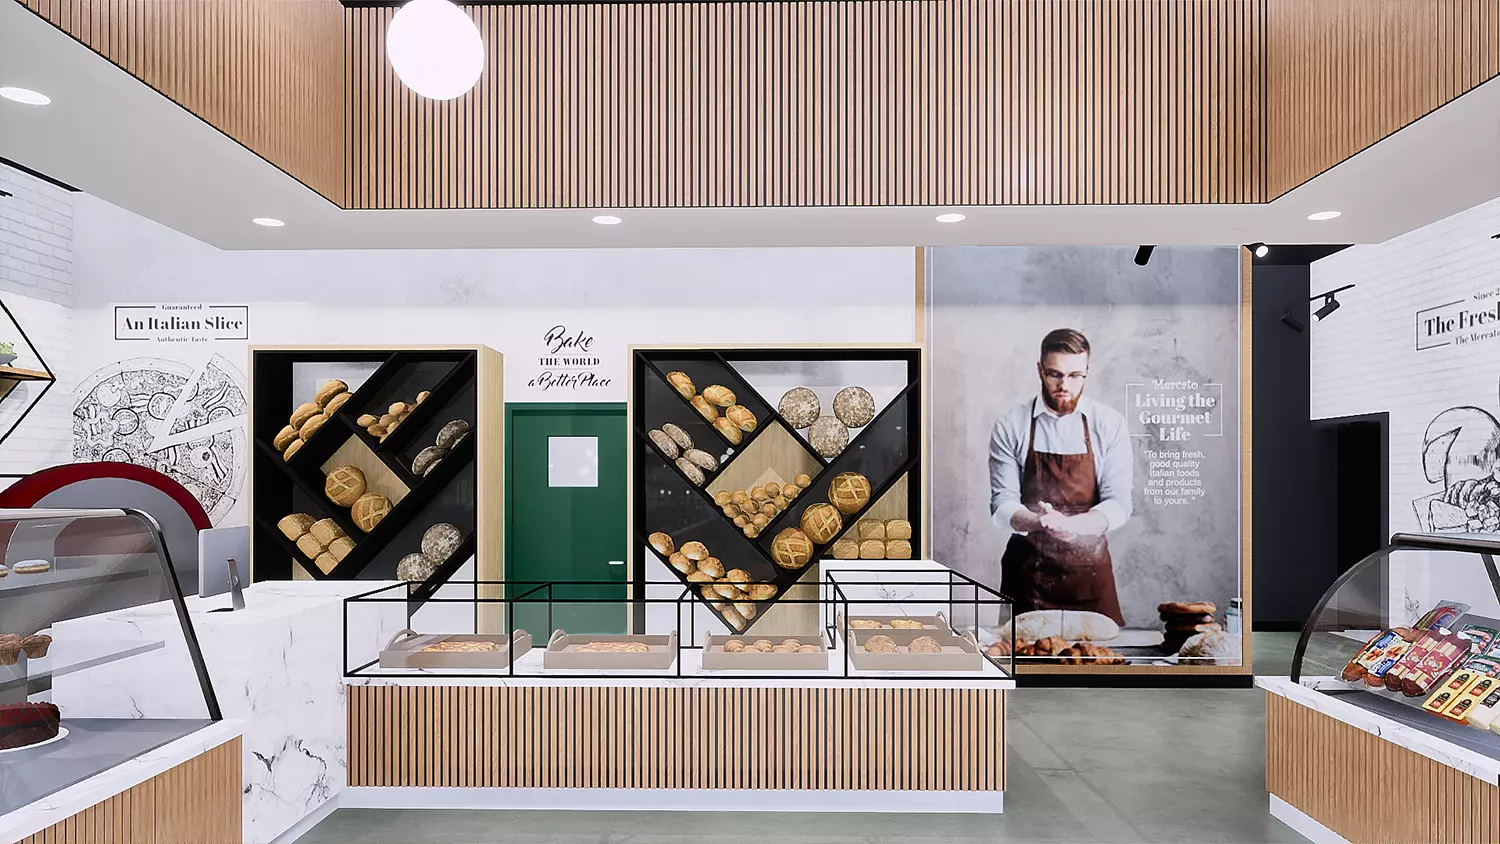 Interior design project for Mercato Fine Foods. Designed detailed drawings of the food market wall surface